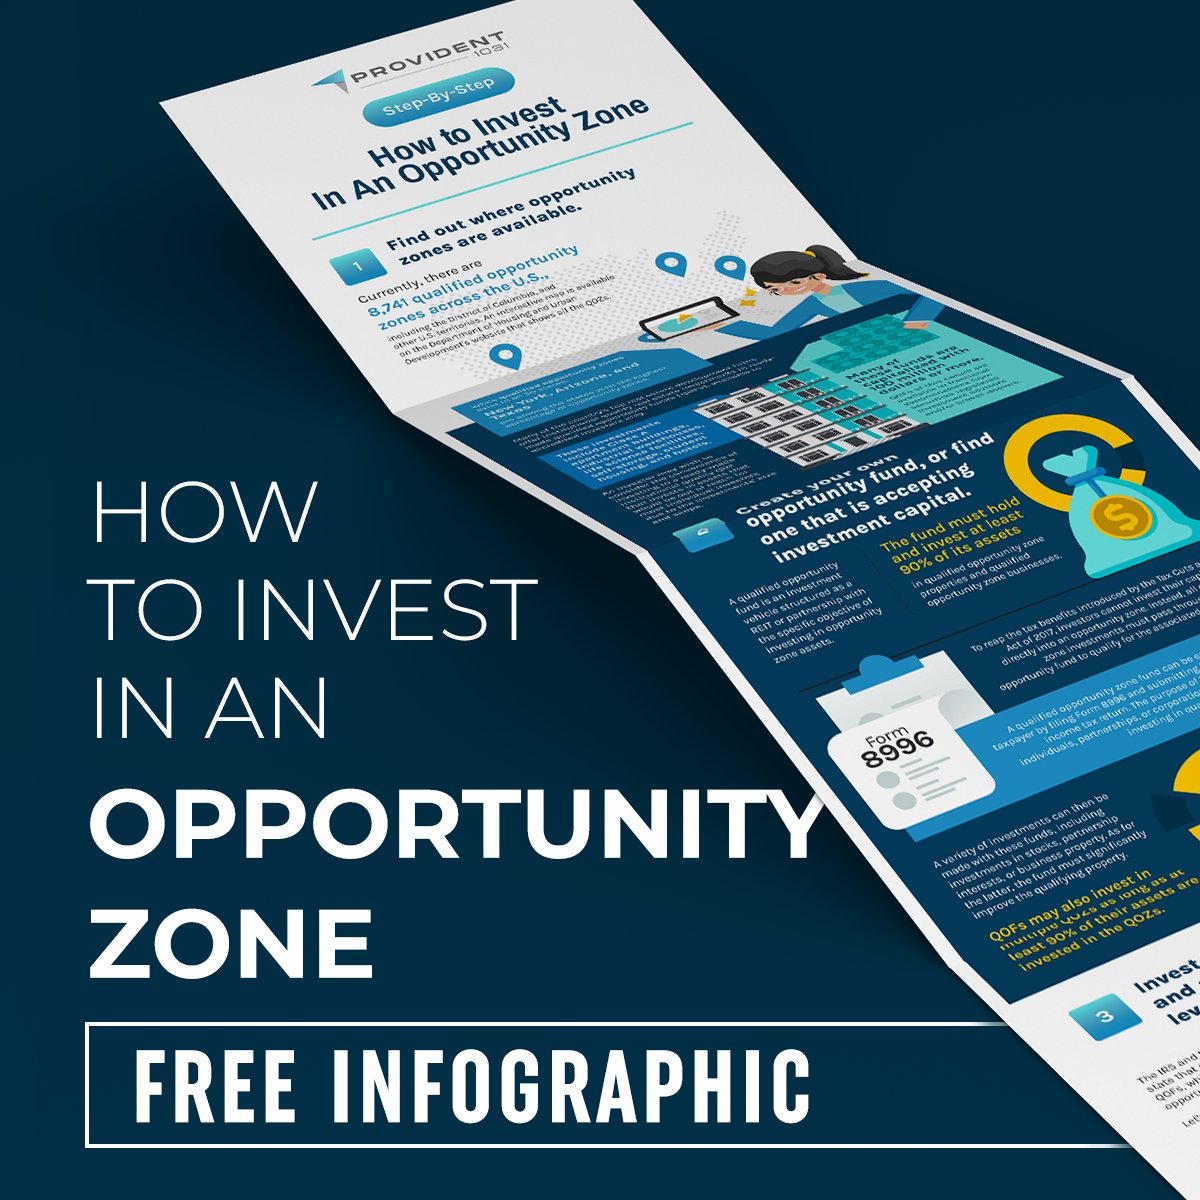 Get our most popular infographic: How To Invest In An Opportunity Zone 

#QOZ #QualifiedOpportunityZone #1031Exchange #OpportunityZones #InvestmentStrategies #Provident1031 #DanielGoodwin #WealthStrategies #QOZInvesting